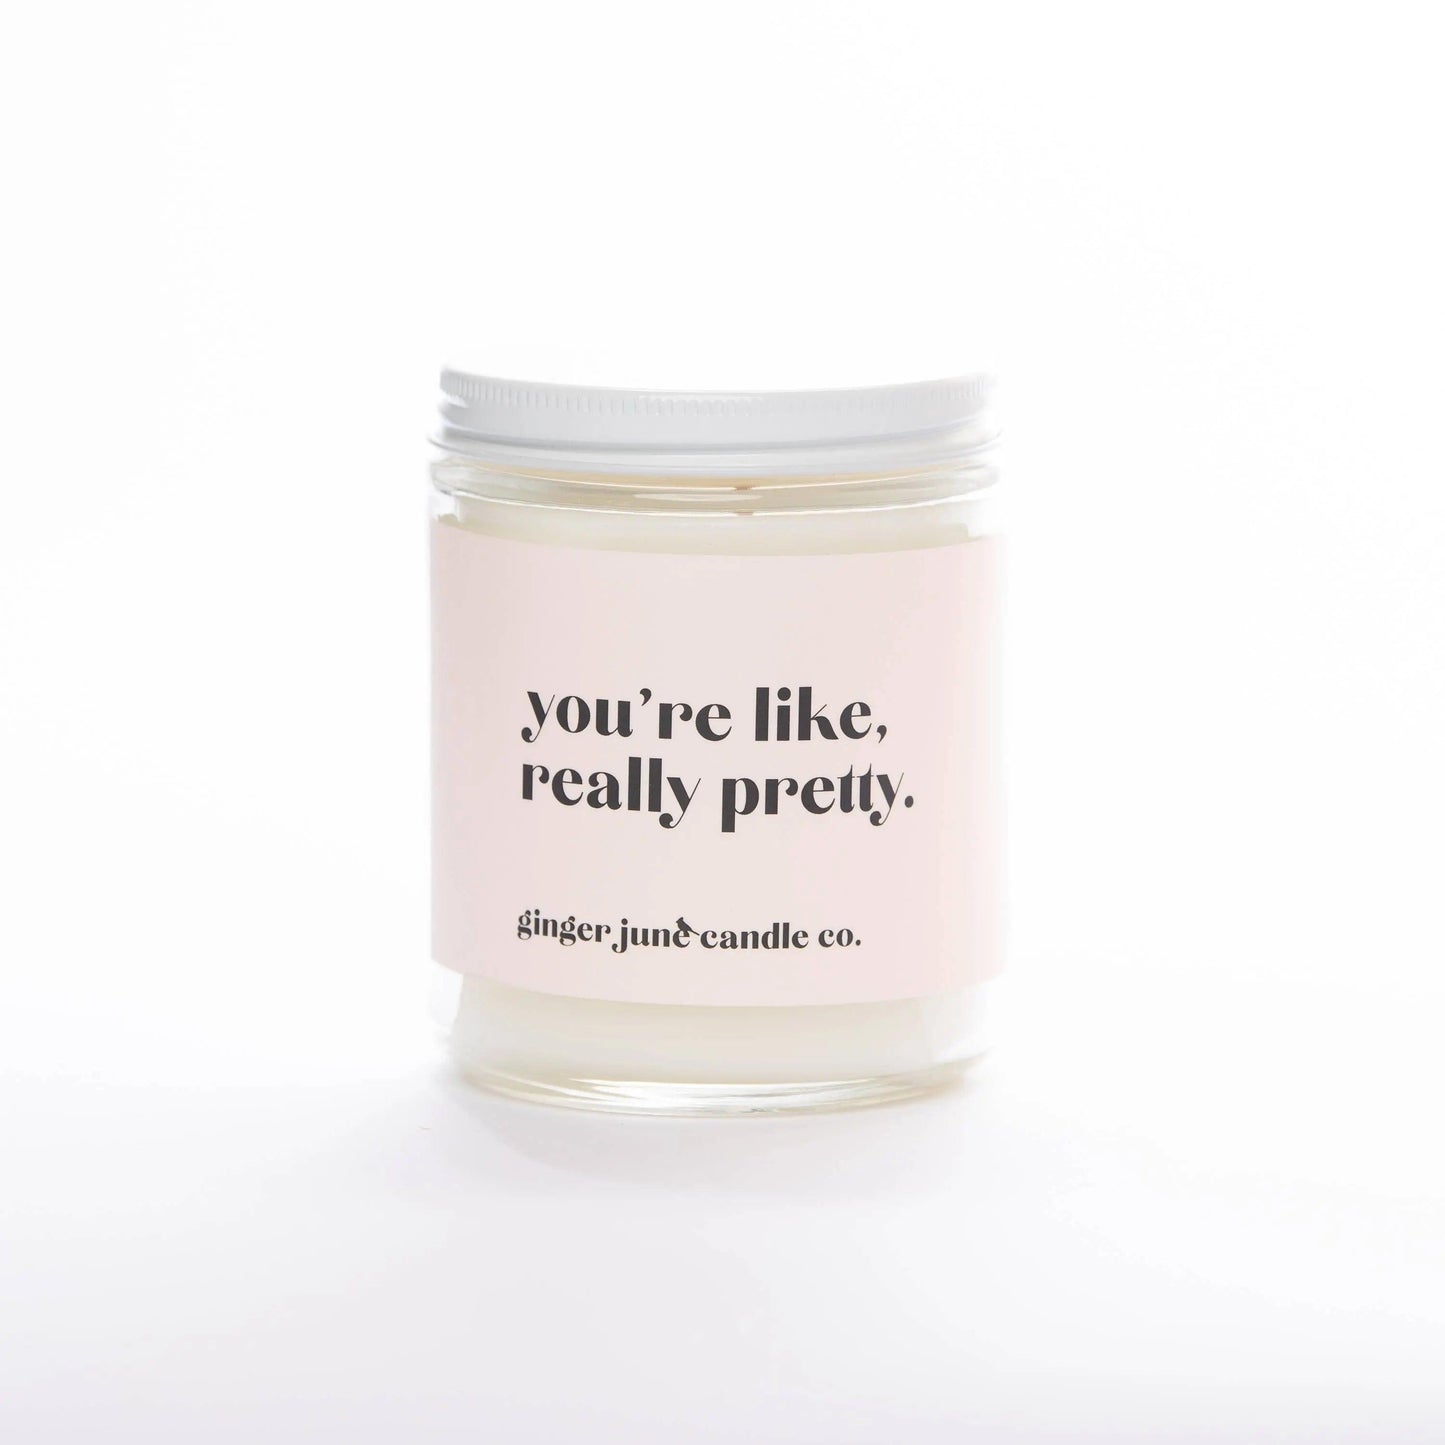 YOU'RE LIKE REALLY PRETTY  NON TOXIC SOY CANDLE Ginger June Candle Co.